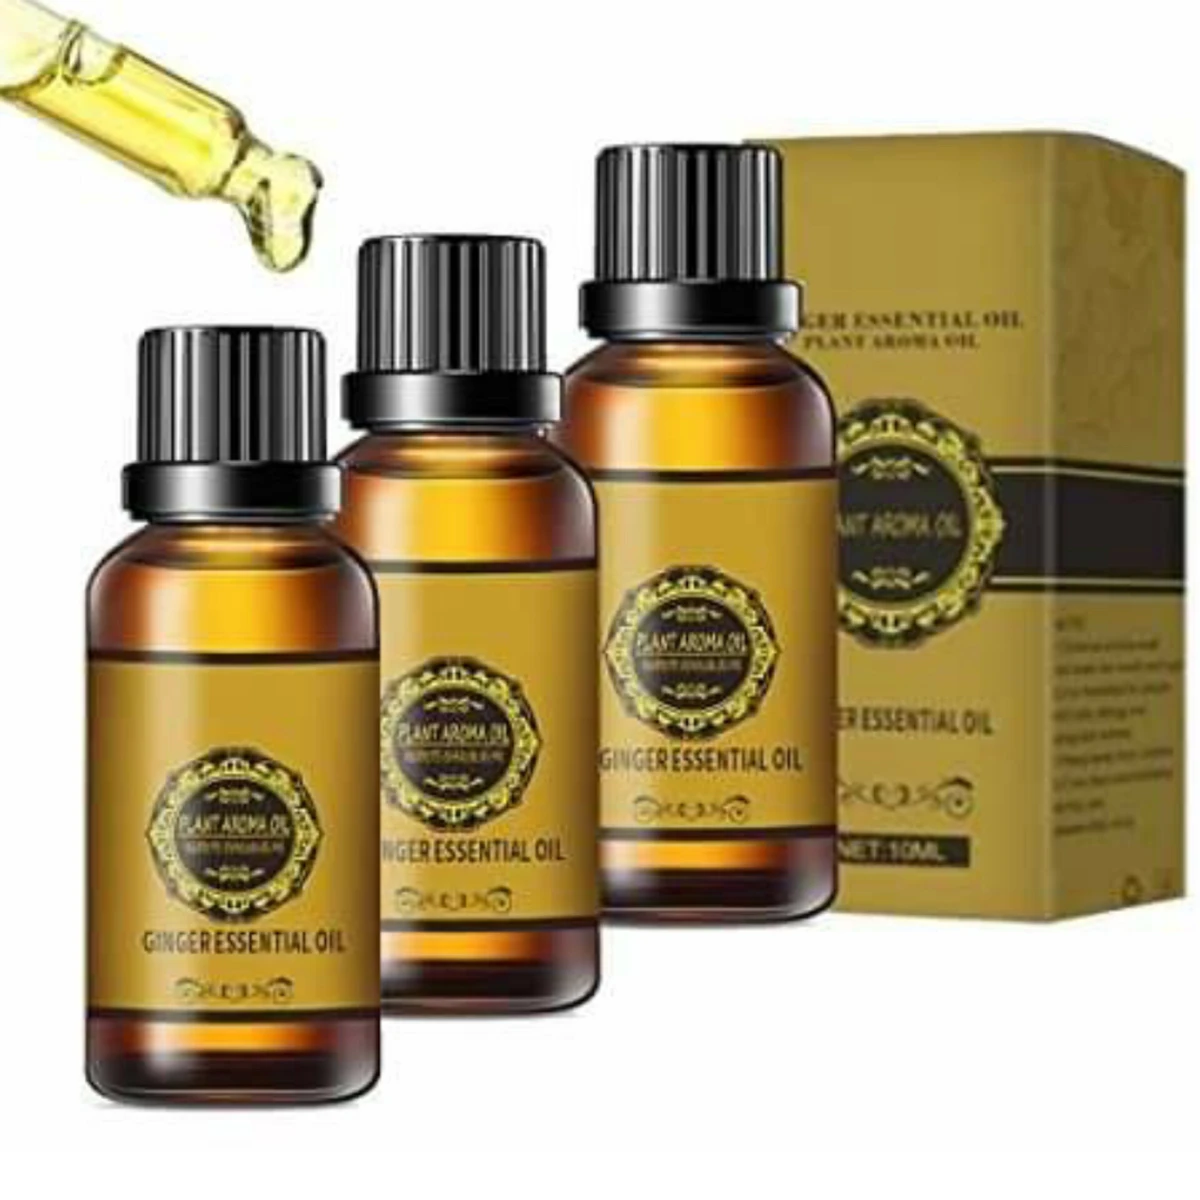 Belly Drainage Ginger Essential Oil (3pc)